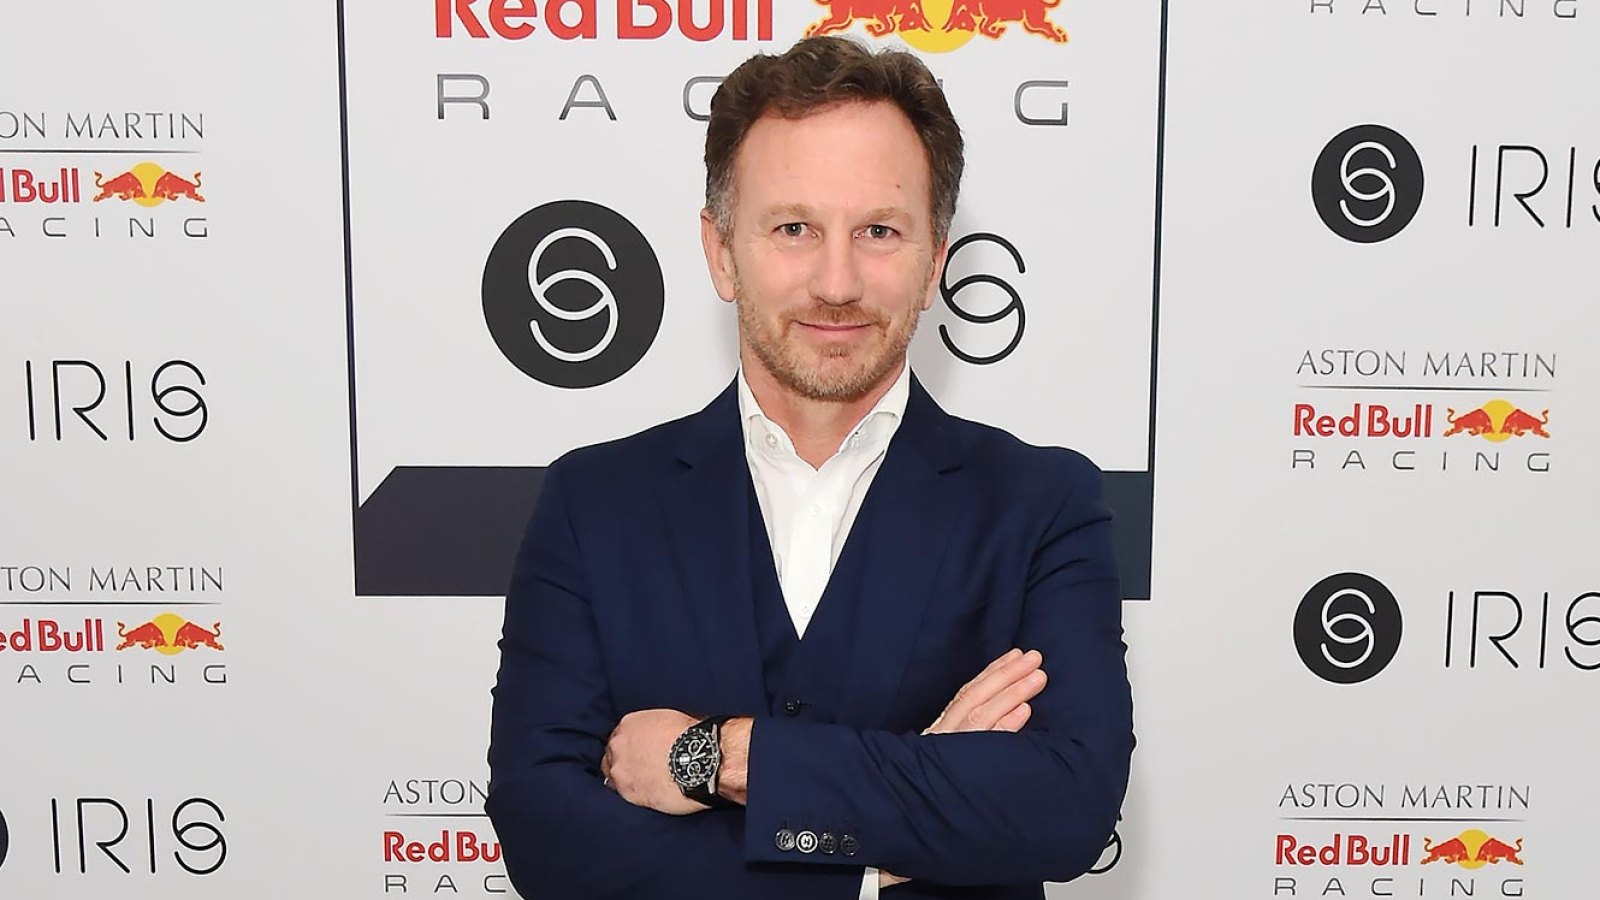 Feature Christian Horner Sexting Scandal With Red Bull Racing